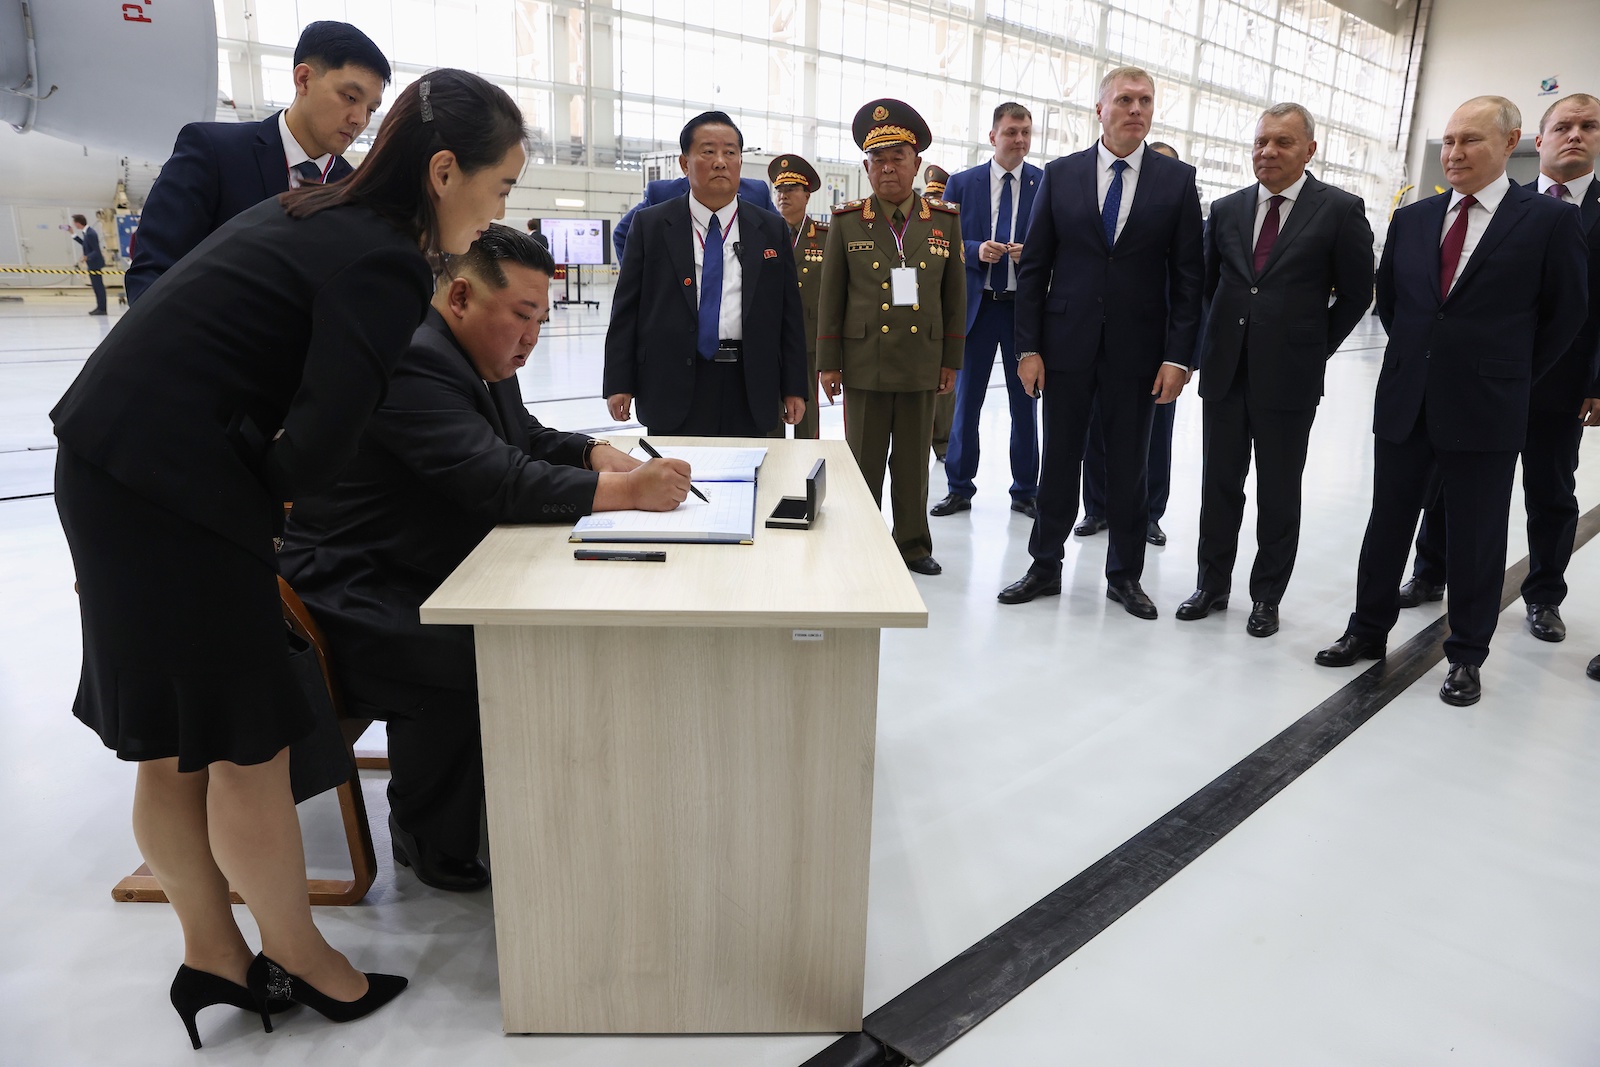 epa10859179 North Korean leader Kim Jong Un (3-L) signs the visitor's book during a visit along with Russian President Vladimir Putin (2-R) to the Vostochny cosmodrome, outside the town of Tsiolkovsky (former Uglegorsk), some 180km north of Blagoveschensk in Amur region, Russia, 13 September 2023.  EPA/ARTEM GEODAKYAN/SPUTNIK/KREMLIN / POOL MANDATORY CREDIT